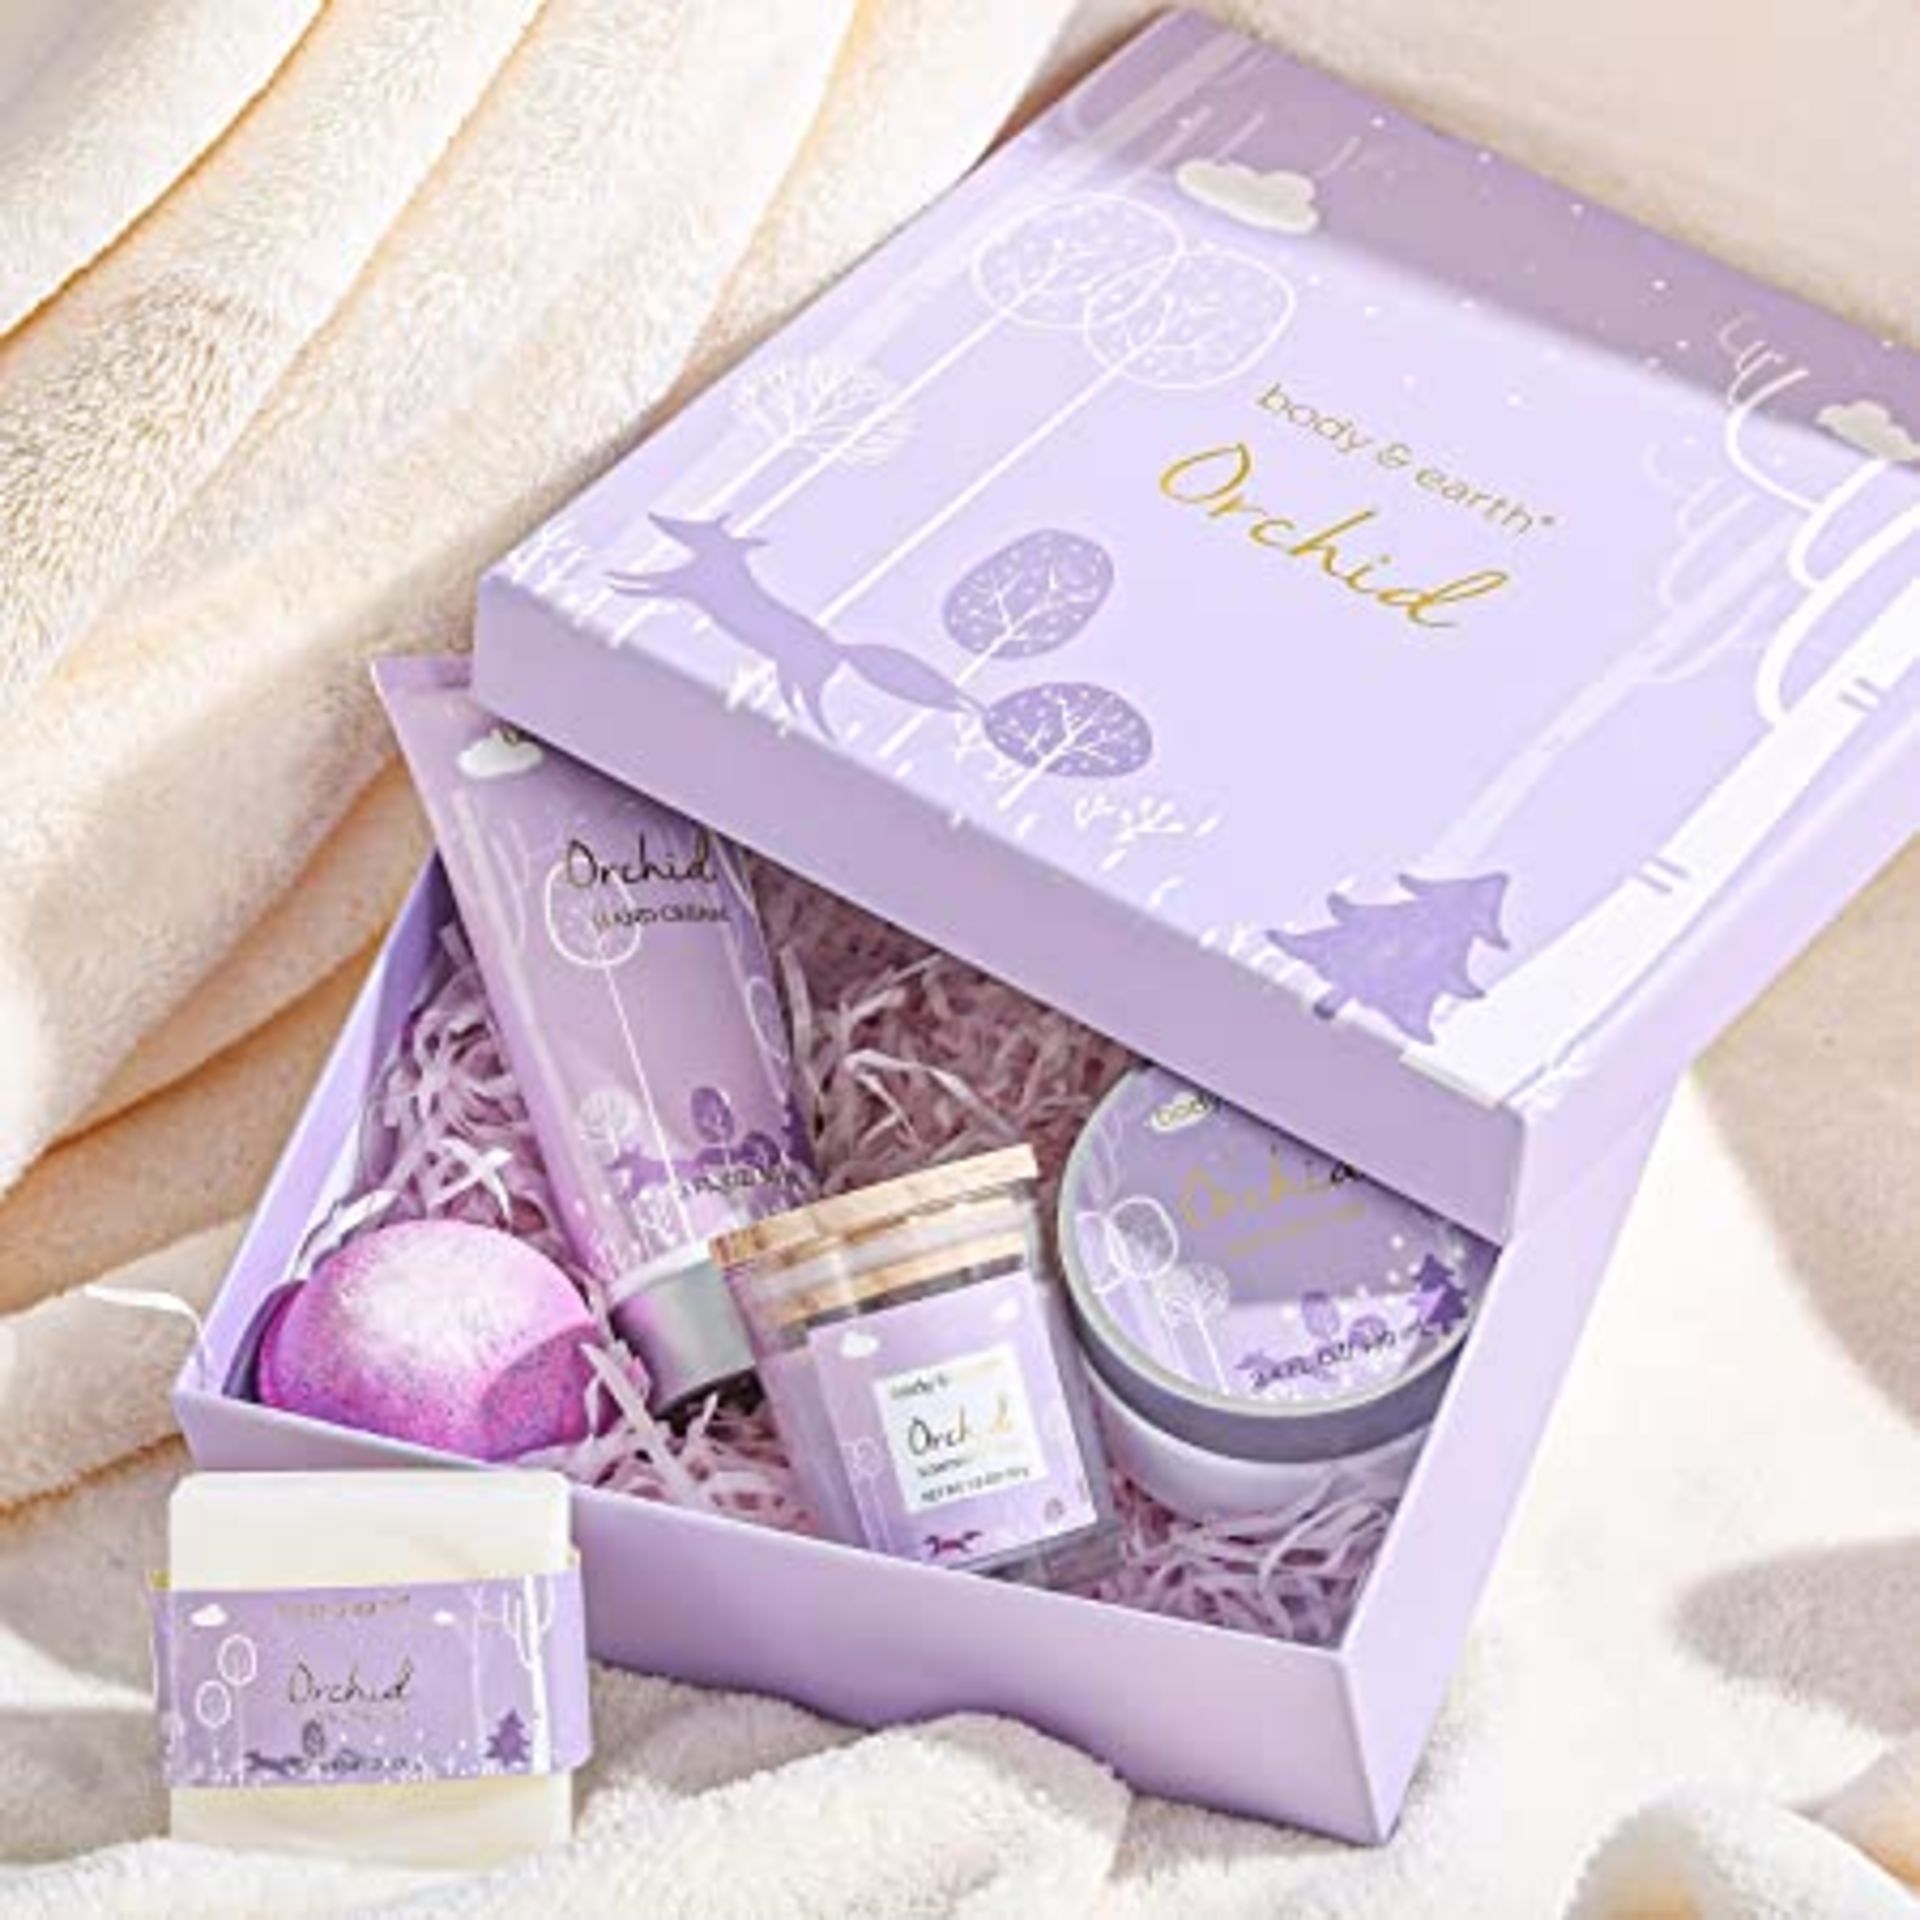 New Packaged Body & Earth Orchid Bath Gift Set. (Be-Bp-043) Orchid Scent: Infused With a Sweet